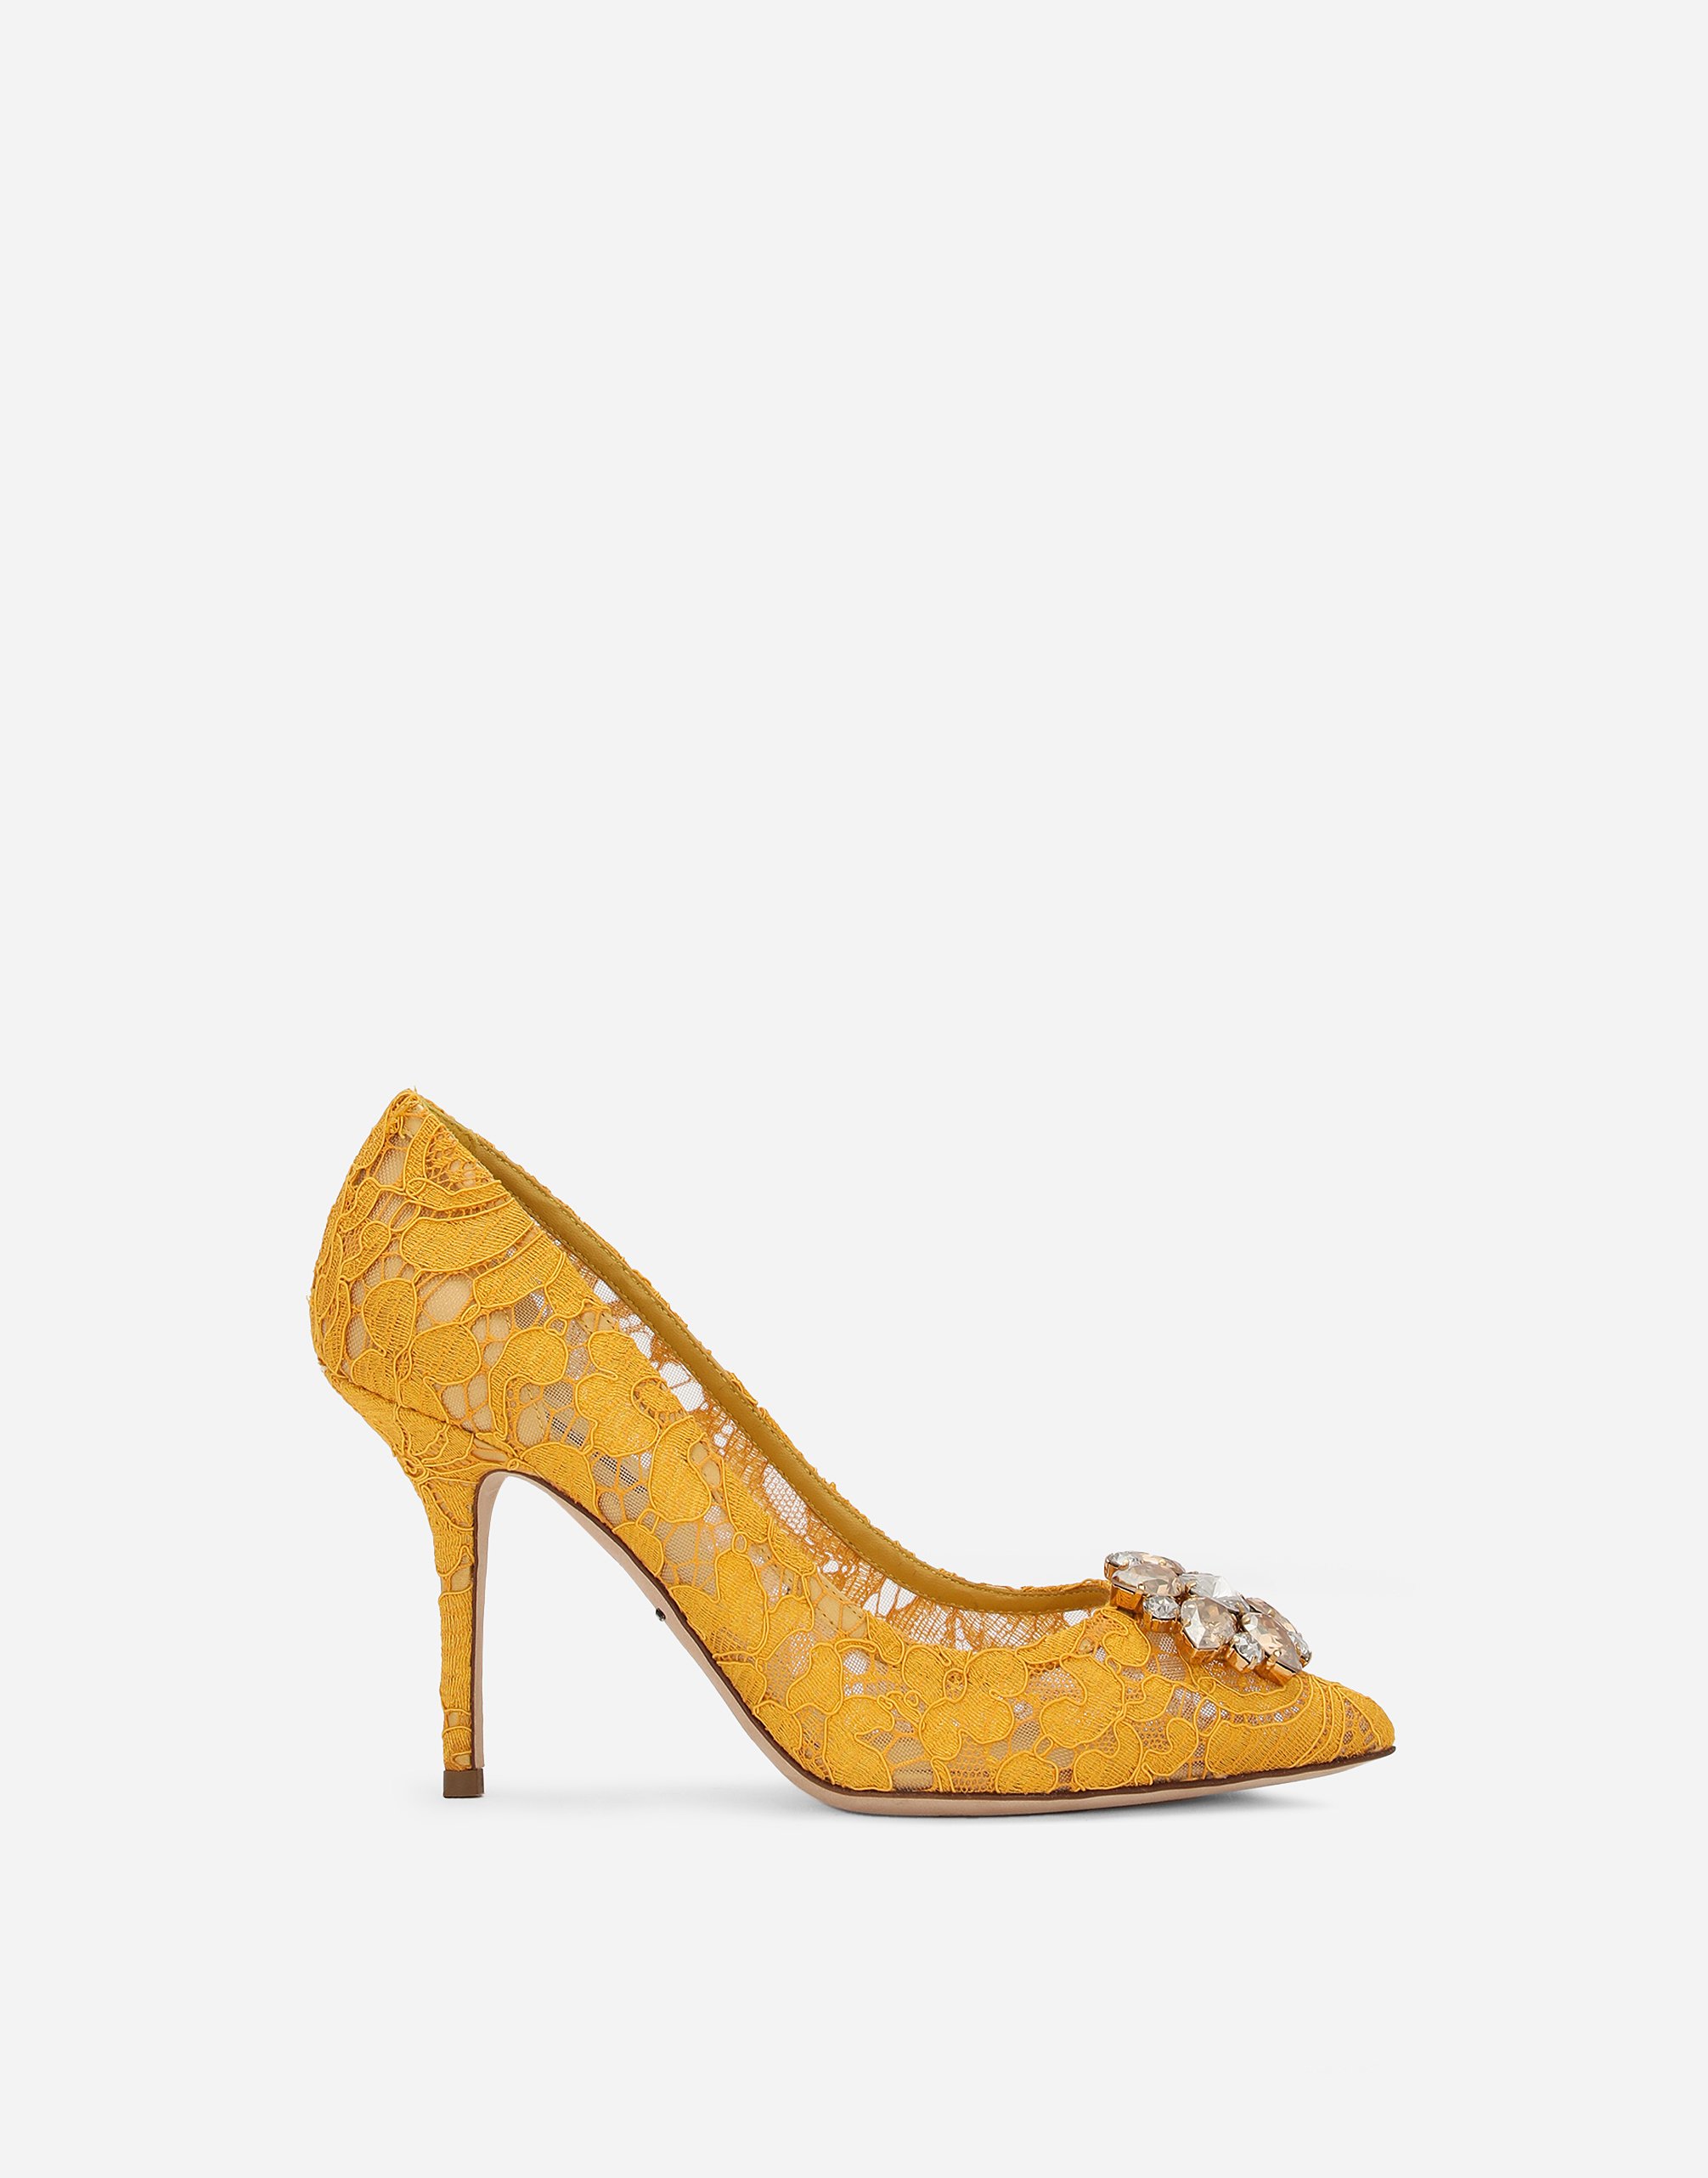 Lace rainbow pumps with brooch detailing in Yellow